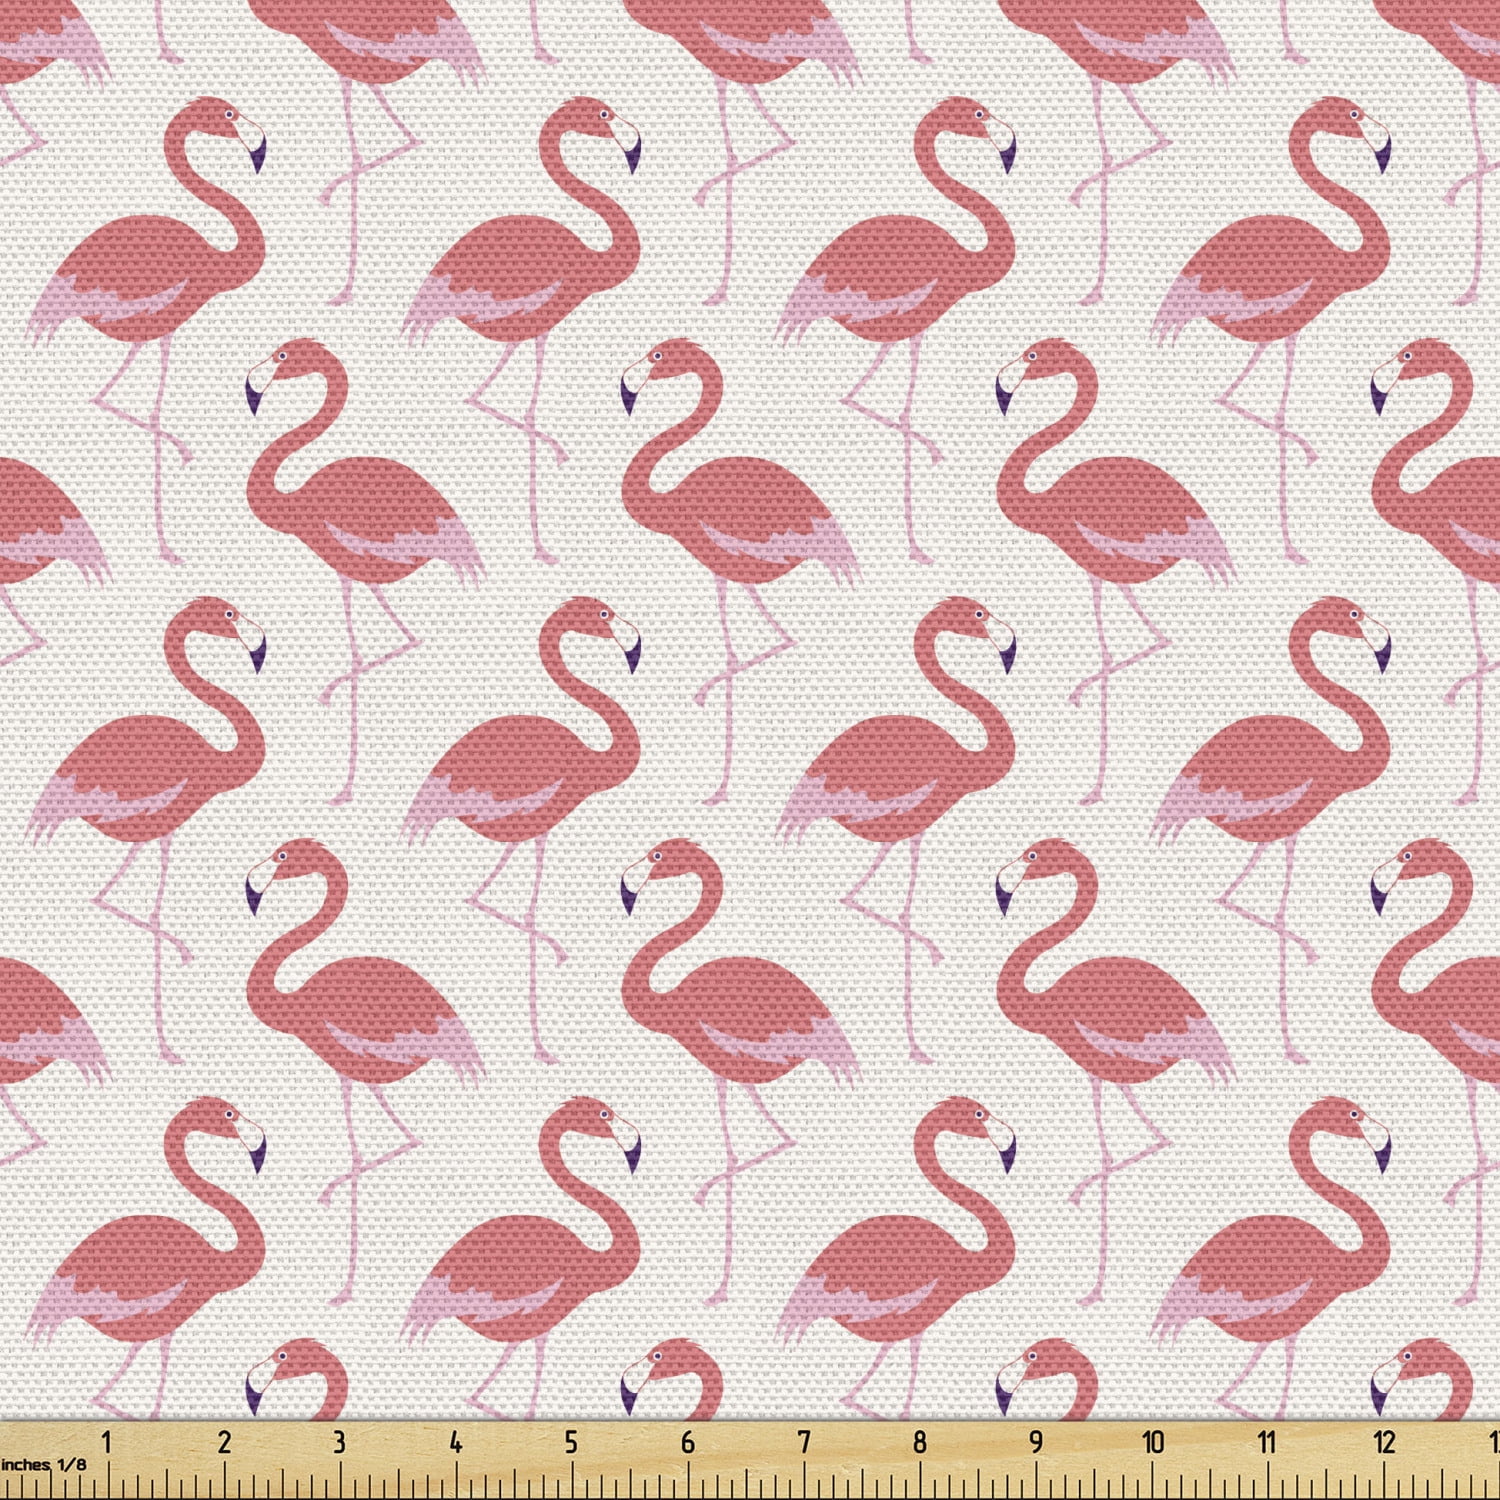 Modtager maskine Kræft skærm Flamingo Fabric by the Yard Upholstery, Exotic Fantasy Pattern with Hawaii  Wildlife Elements in Pastel Colors, Decorative Fabric for DIY Home Accents,  10 Yards, Beige Dark Coral Purple by Ambesonne - Walmart.com